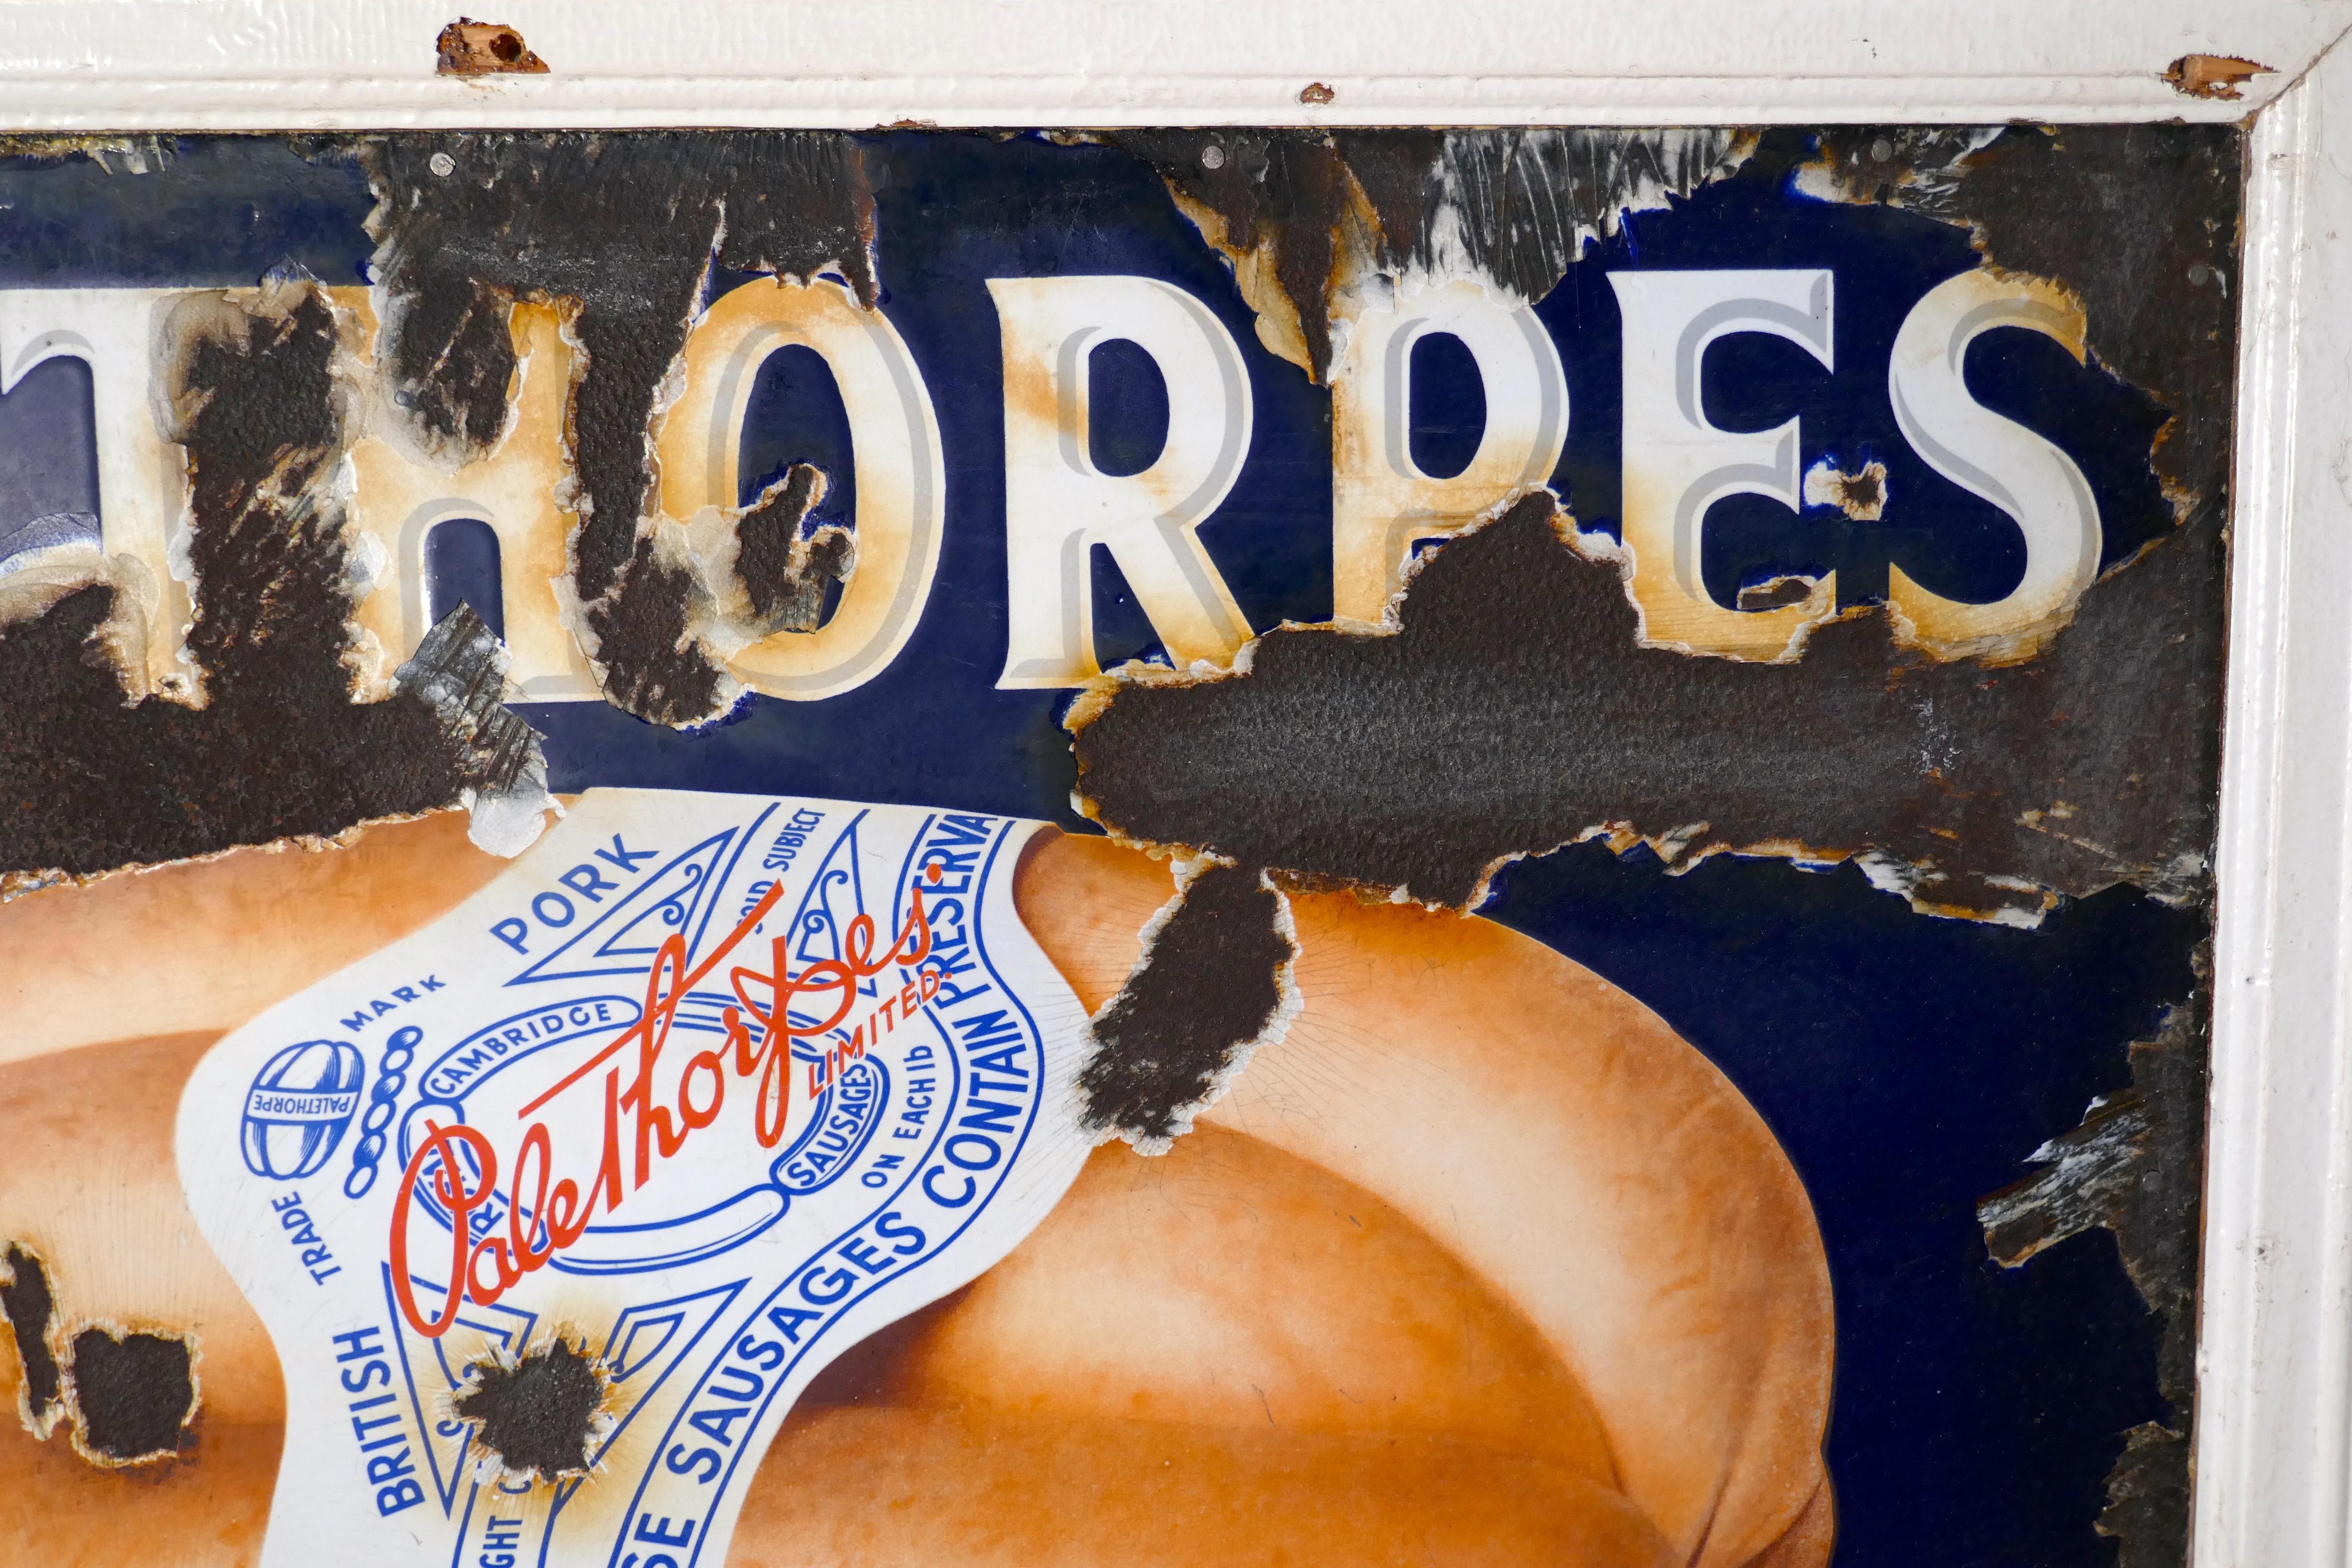 Original Palethorps Enamel sausage sign

Very Rare old sign with a mouth watering picture of Palethorps Royal Cambridge sausages 

The sign is made in ceramic enamel, it dates from around 1940. It is in original unrestored condition and is in a